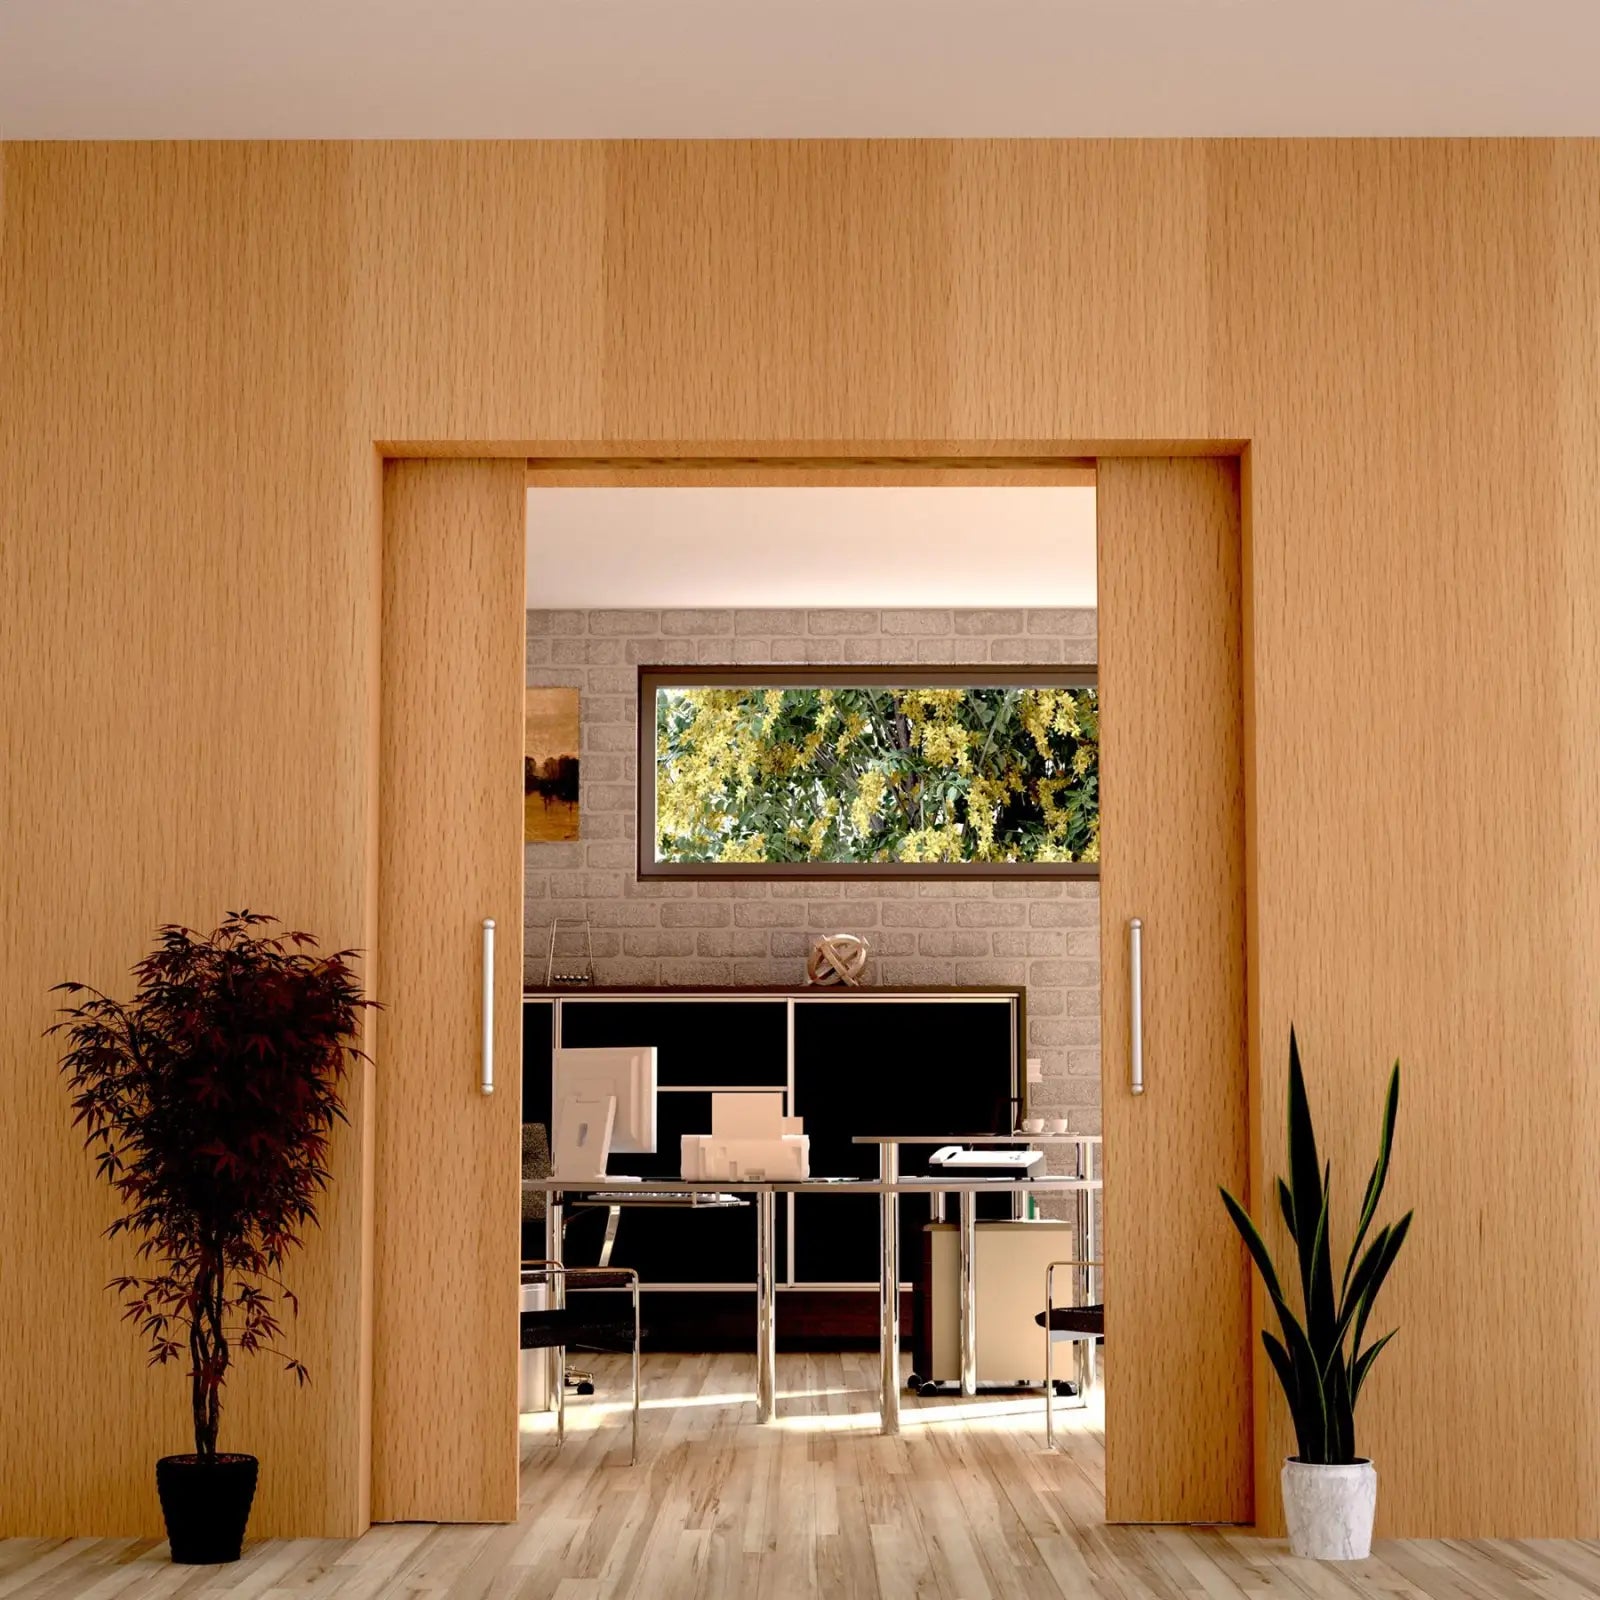 DS-Slide Double Synchro Sliding Door Kit - 3600mm Track - One Way Soft Close - Decor And Decor